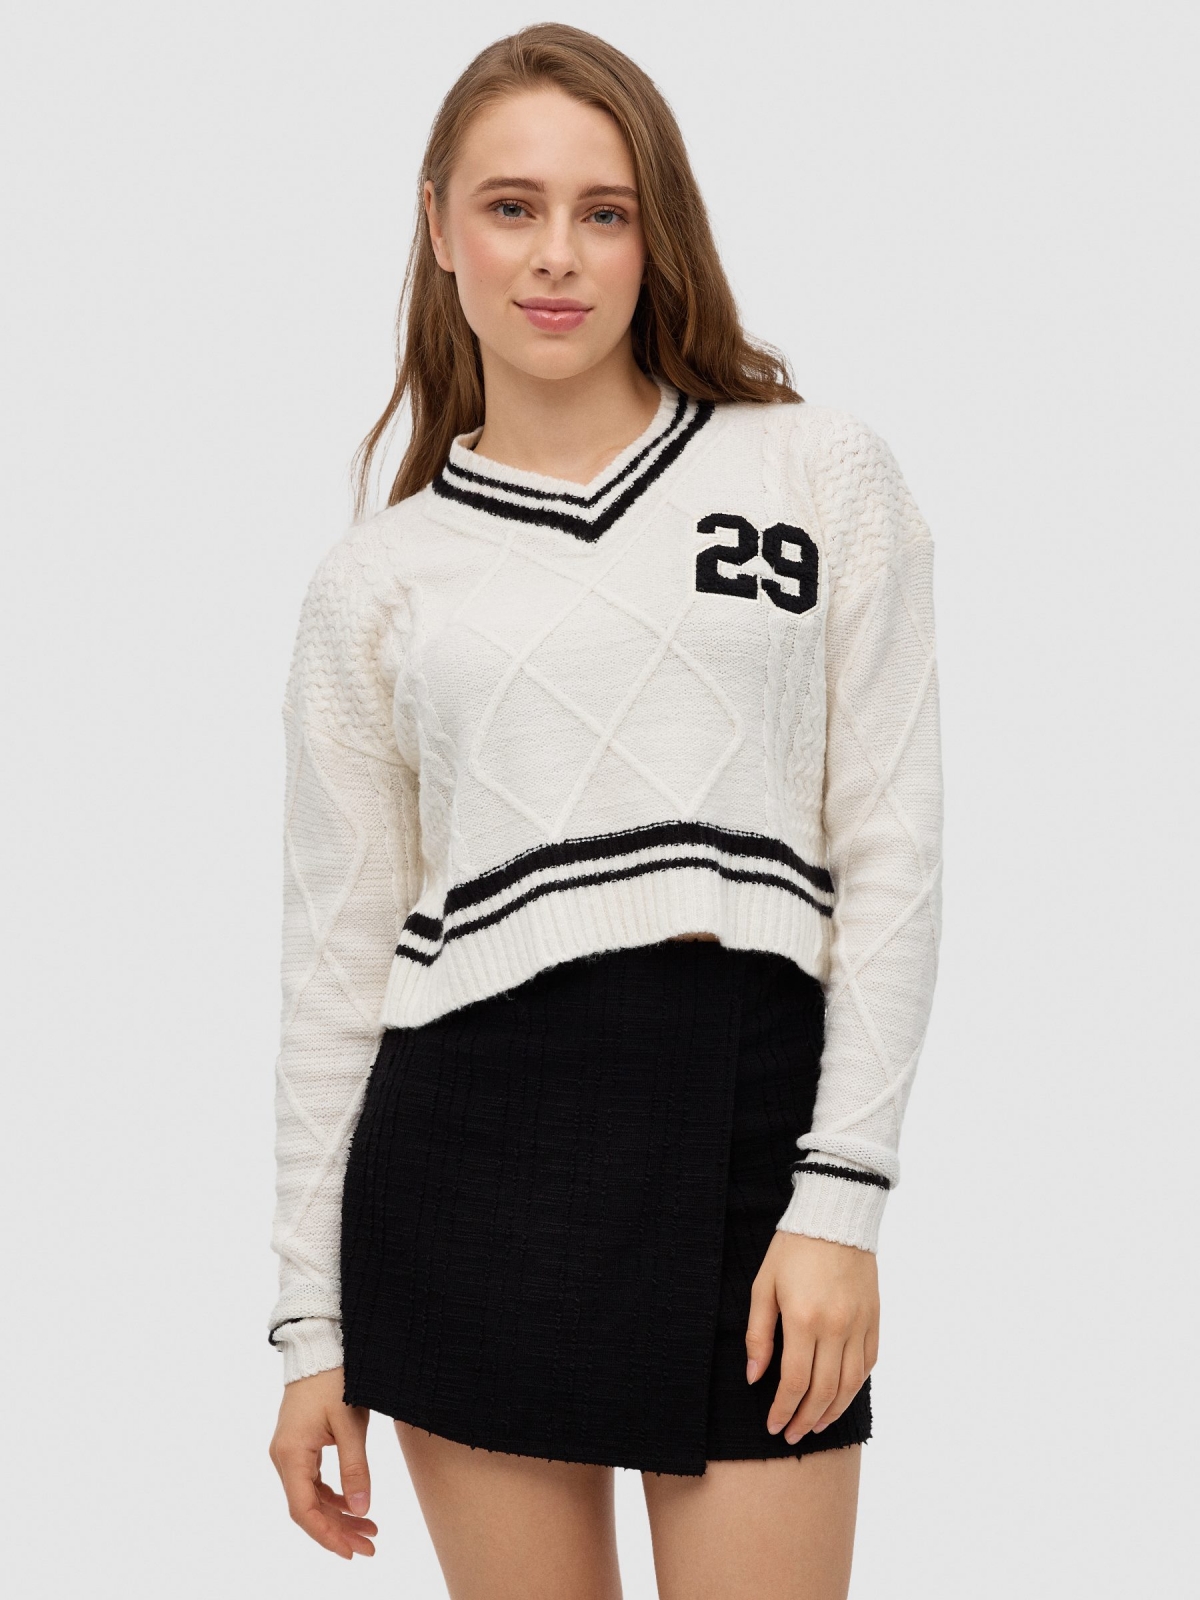 Jersey College 29 off white middle front view